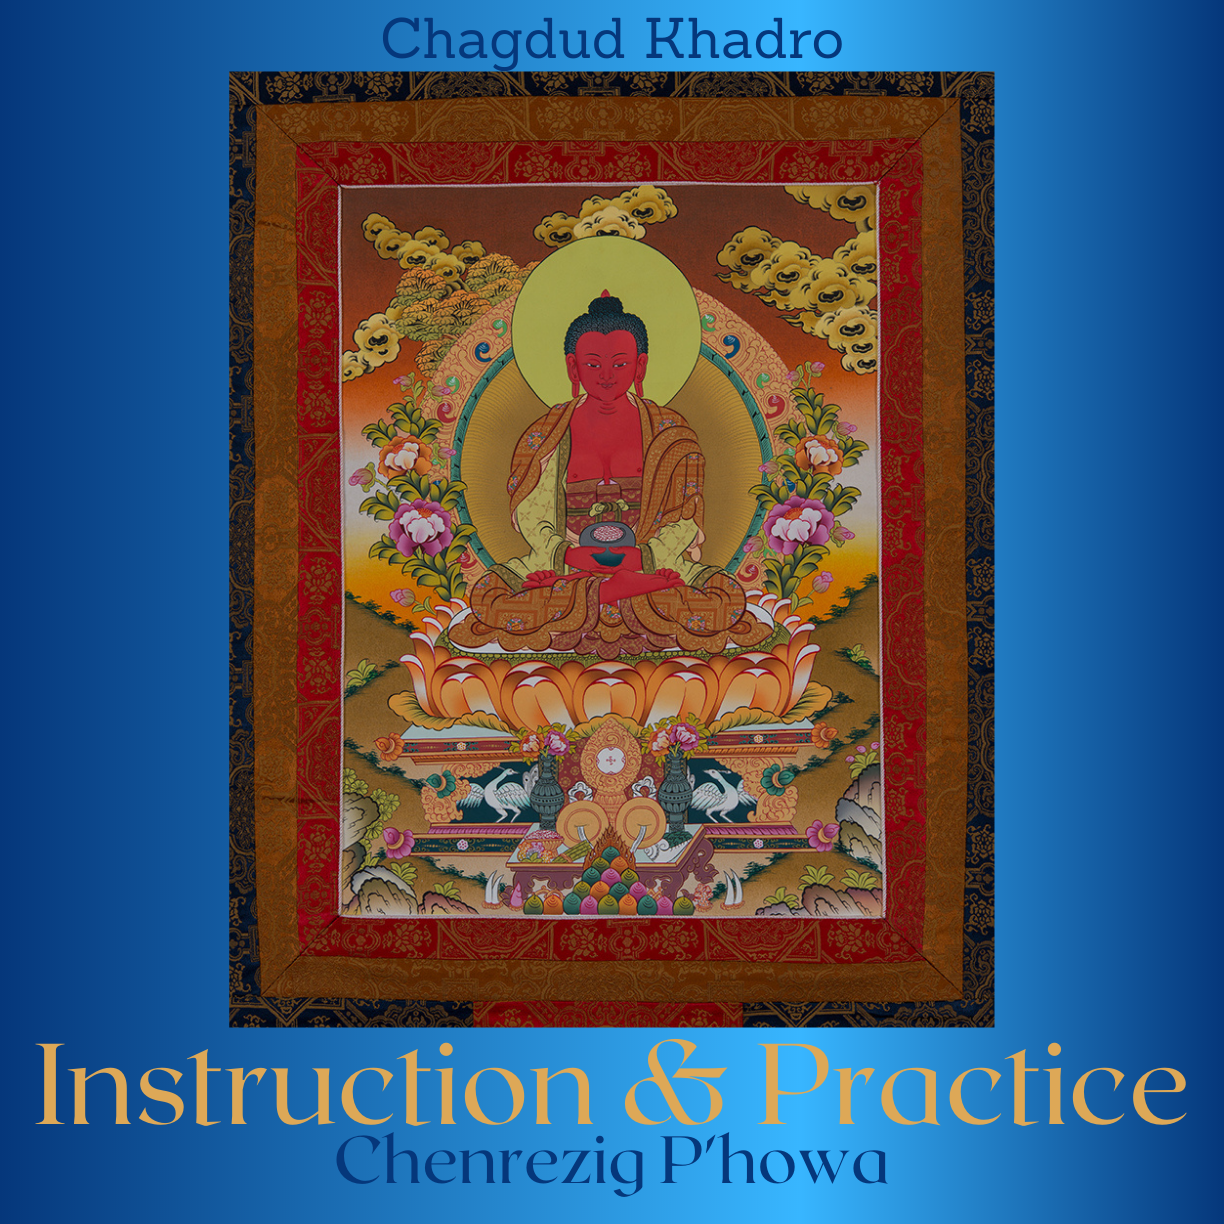 Chenrezig P'howa Introduction and Practice with Chagdud Khadro - DVD